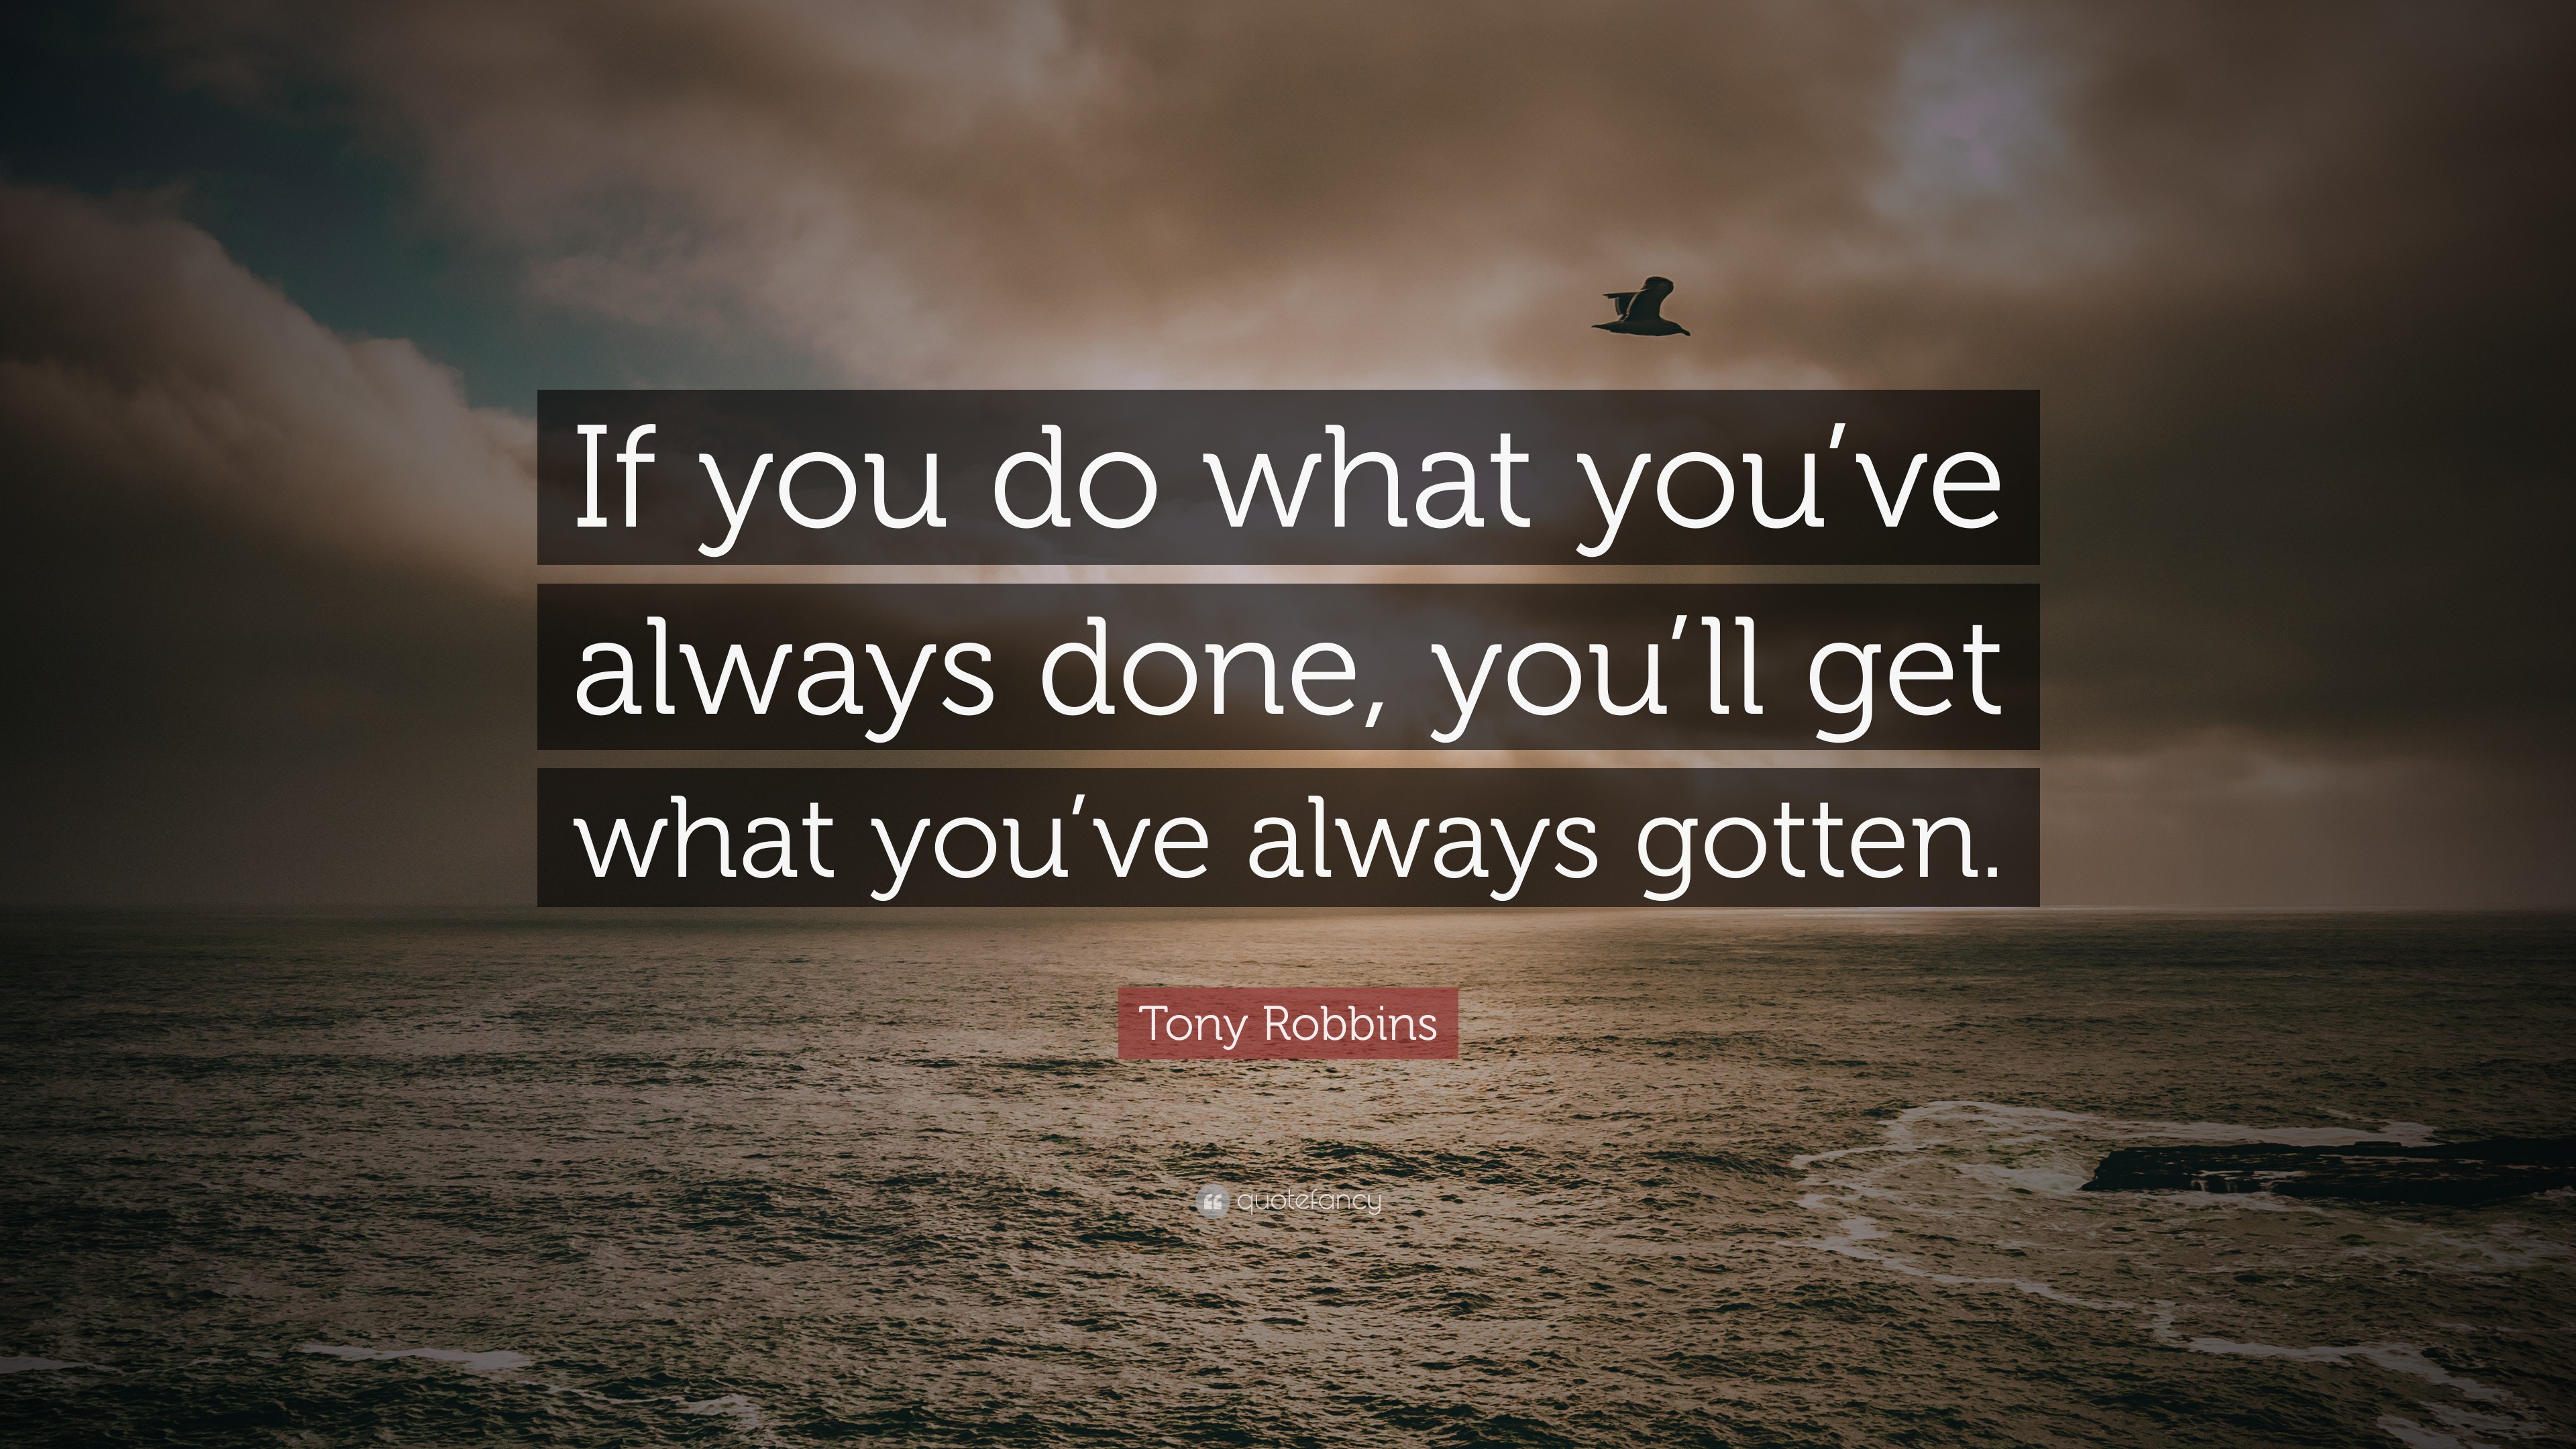 Tony Robbins Quote: “If you do what you’ve always done, you’ll get what ...